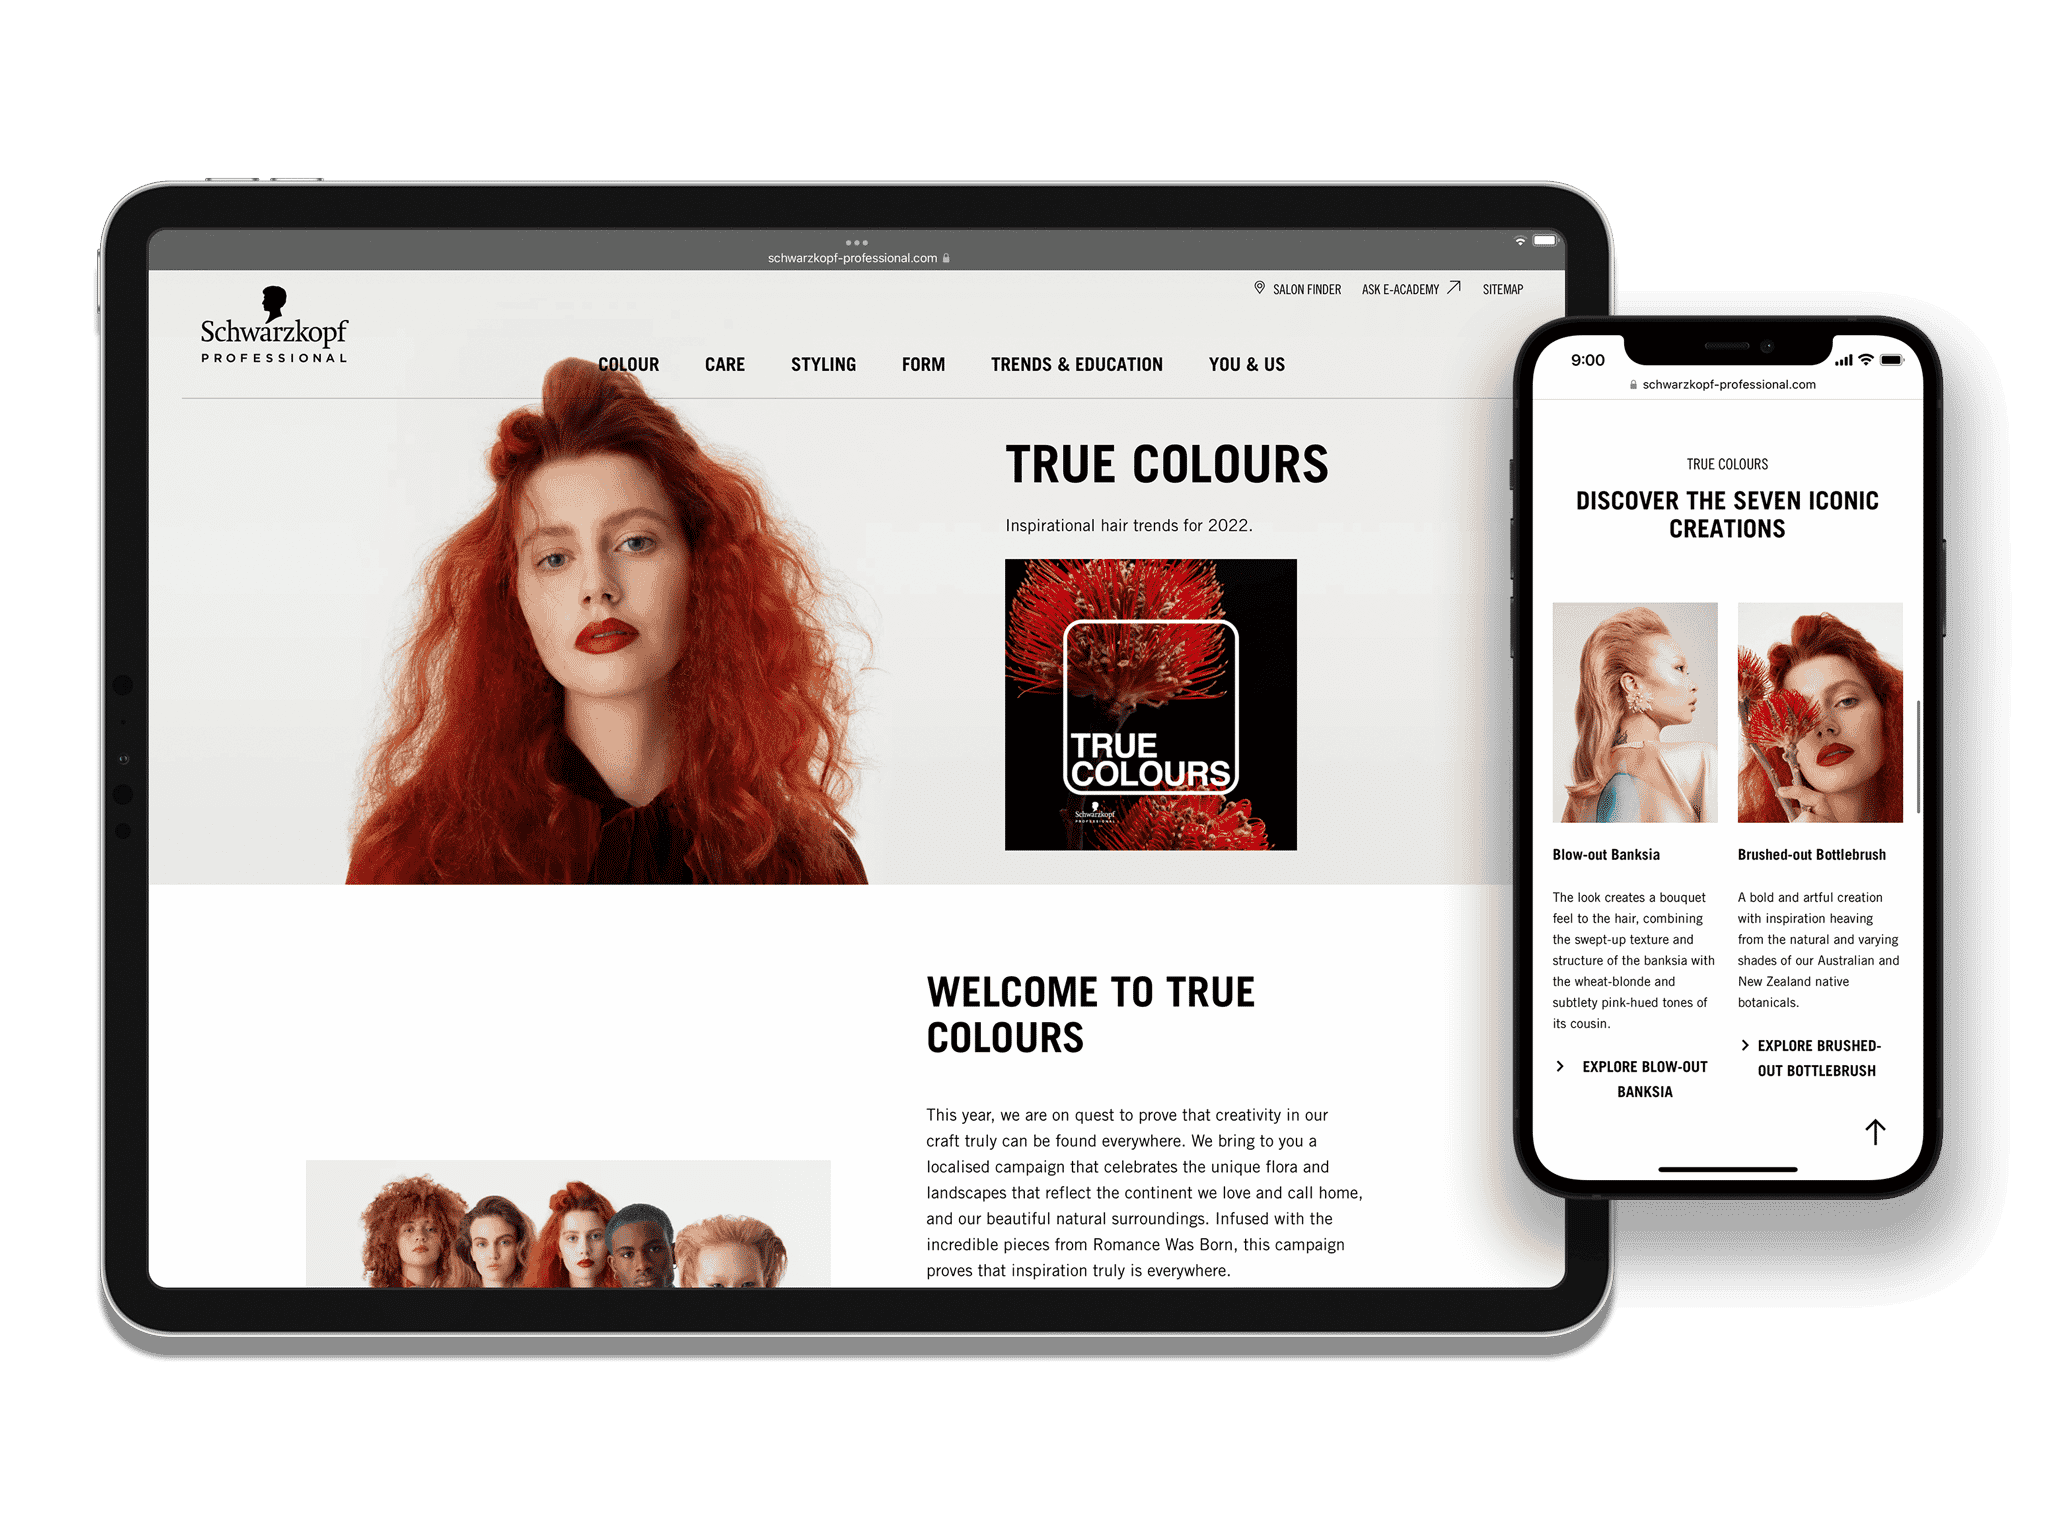 an iPad and iPhone showing the Schwarzkopf True Colours campaign website